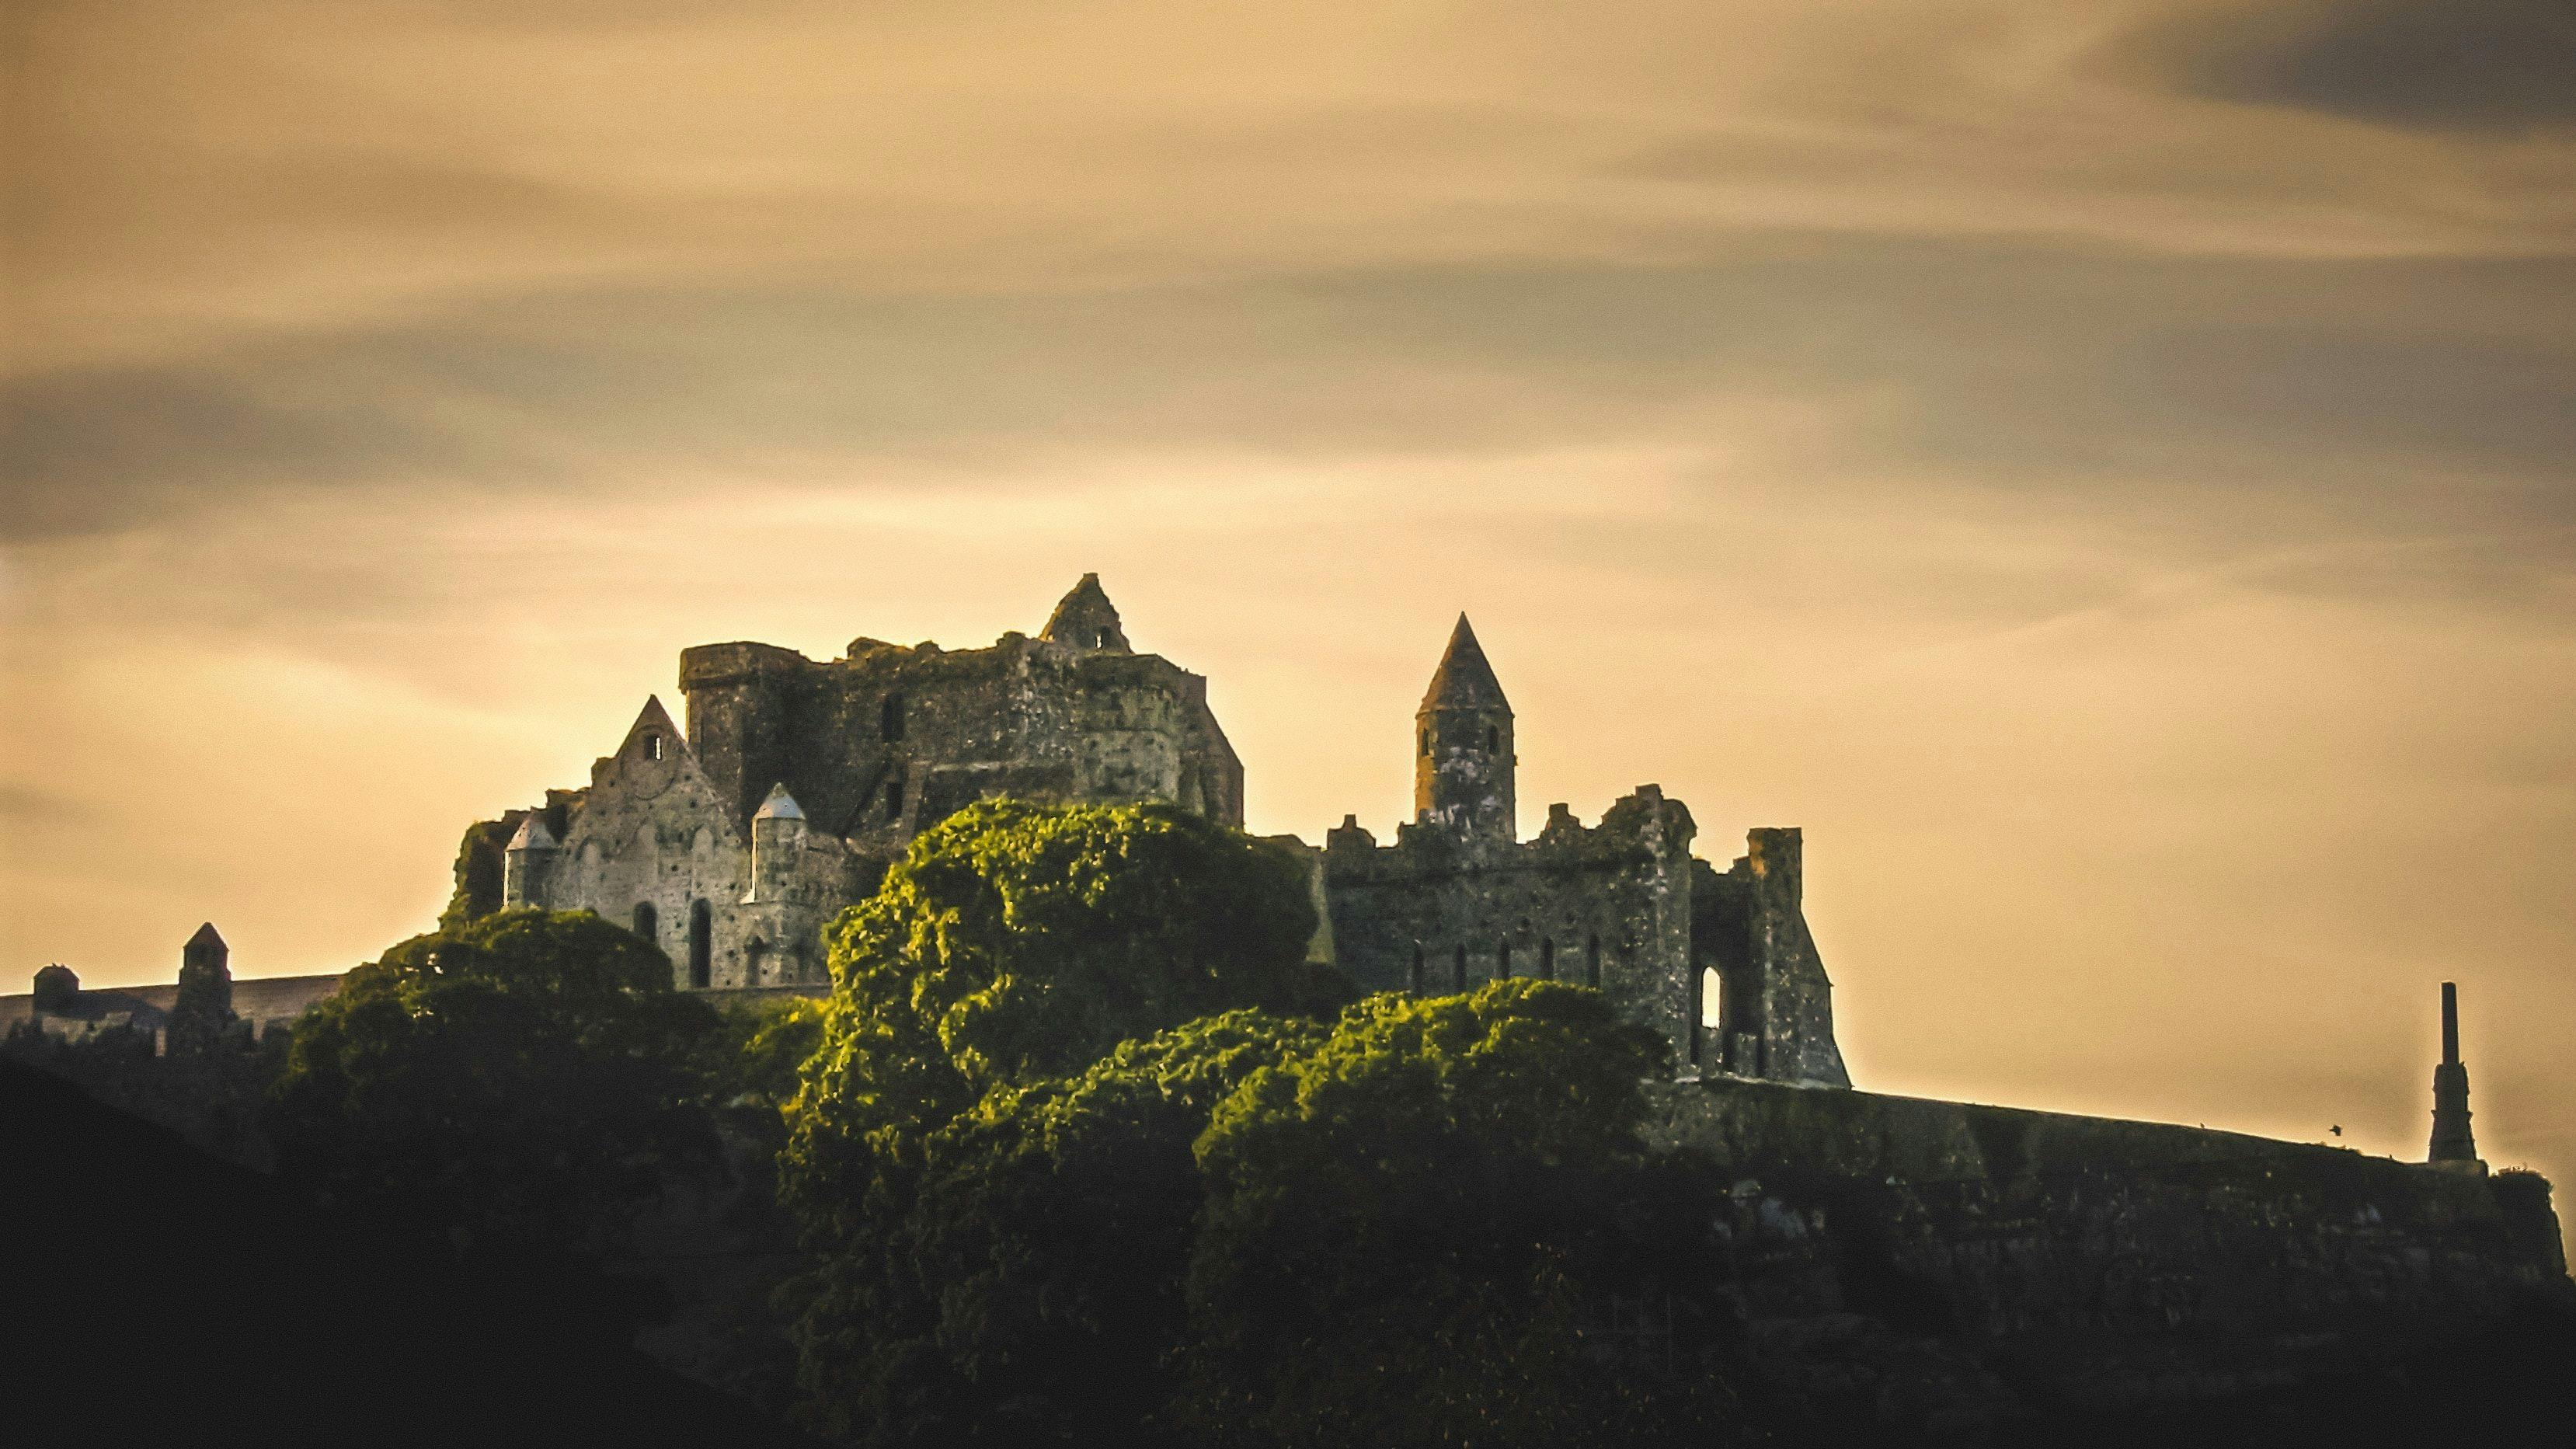 The Rock of Cashel in County Tipperary - places to visit in Ireland - RatePunk